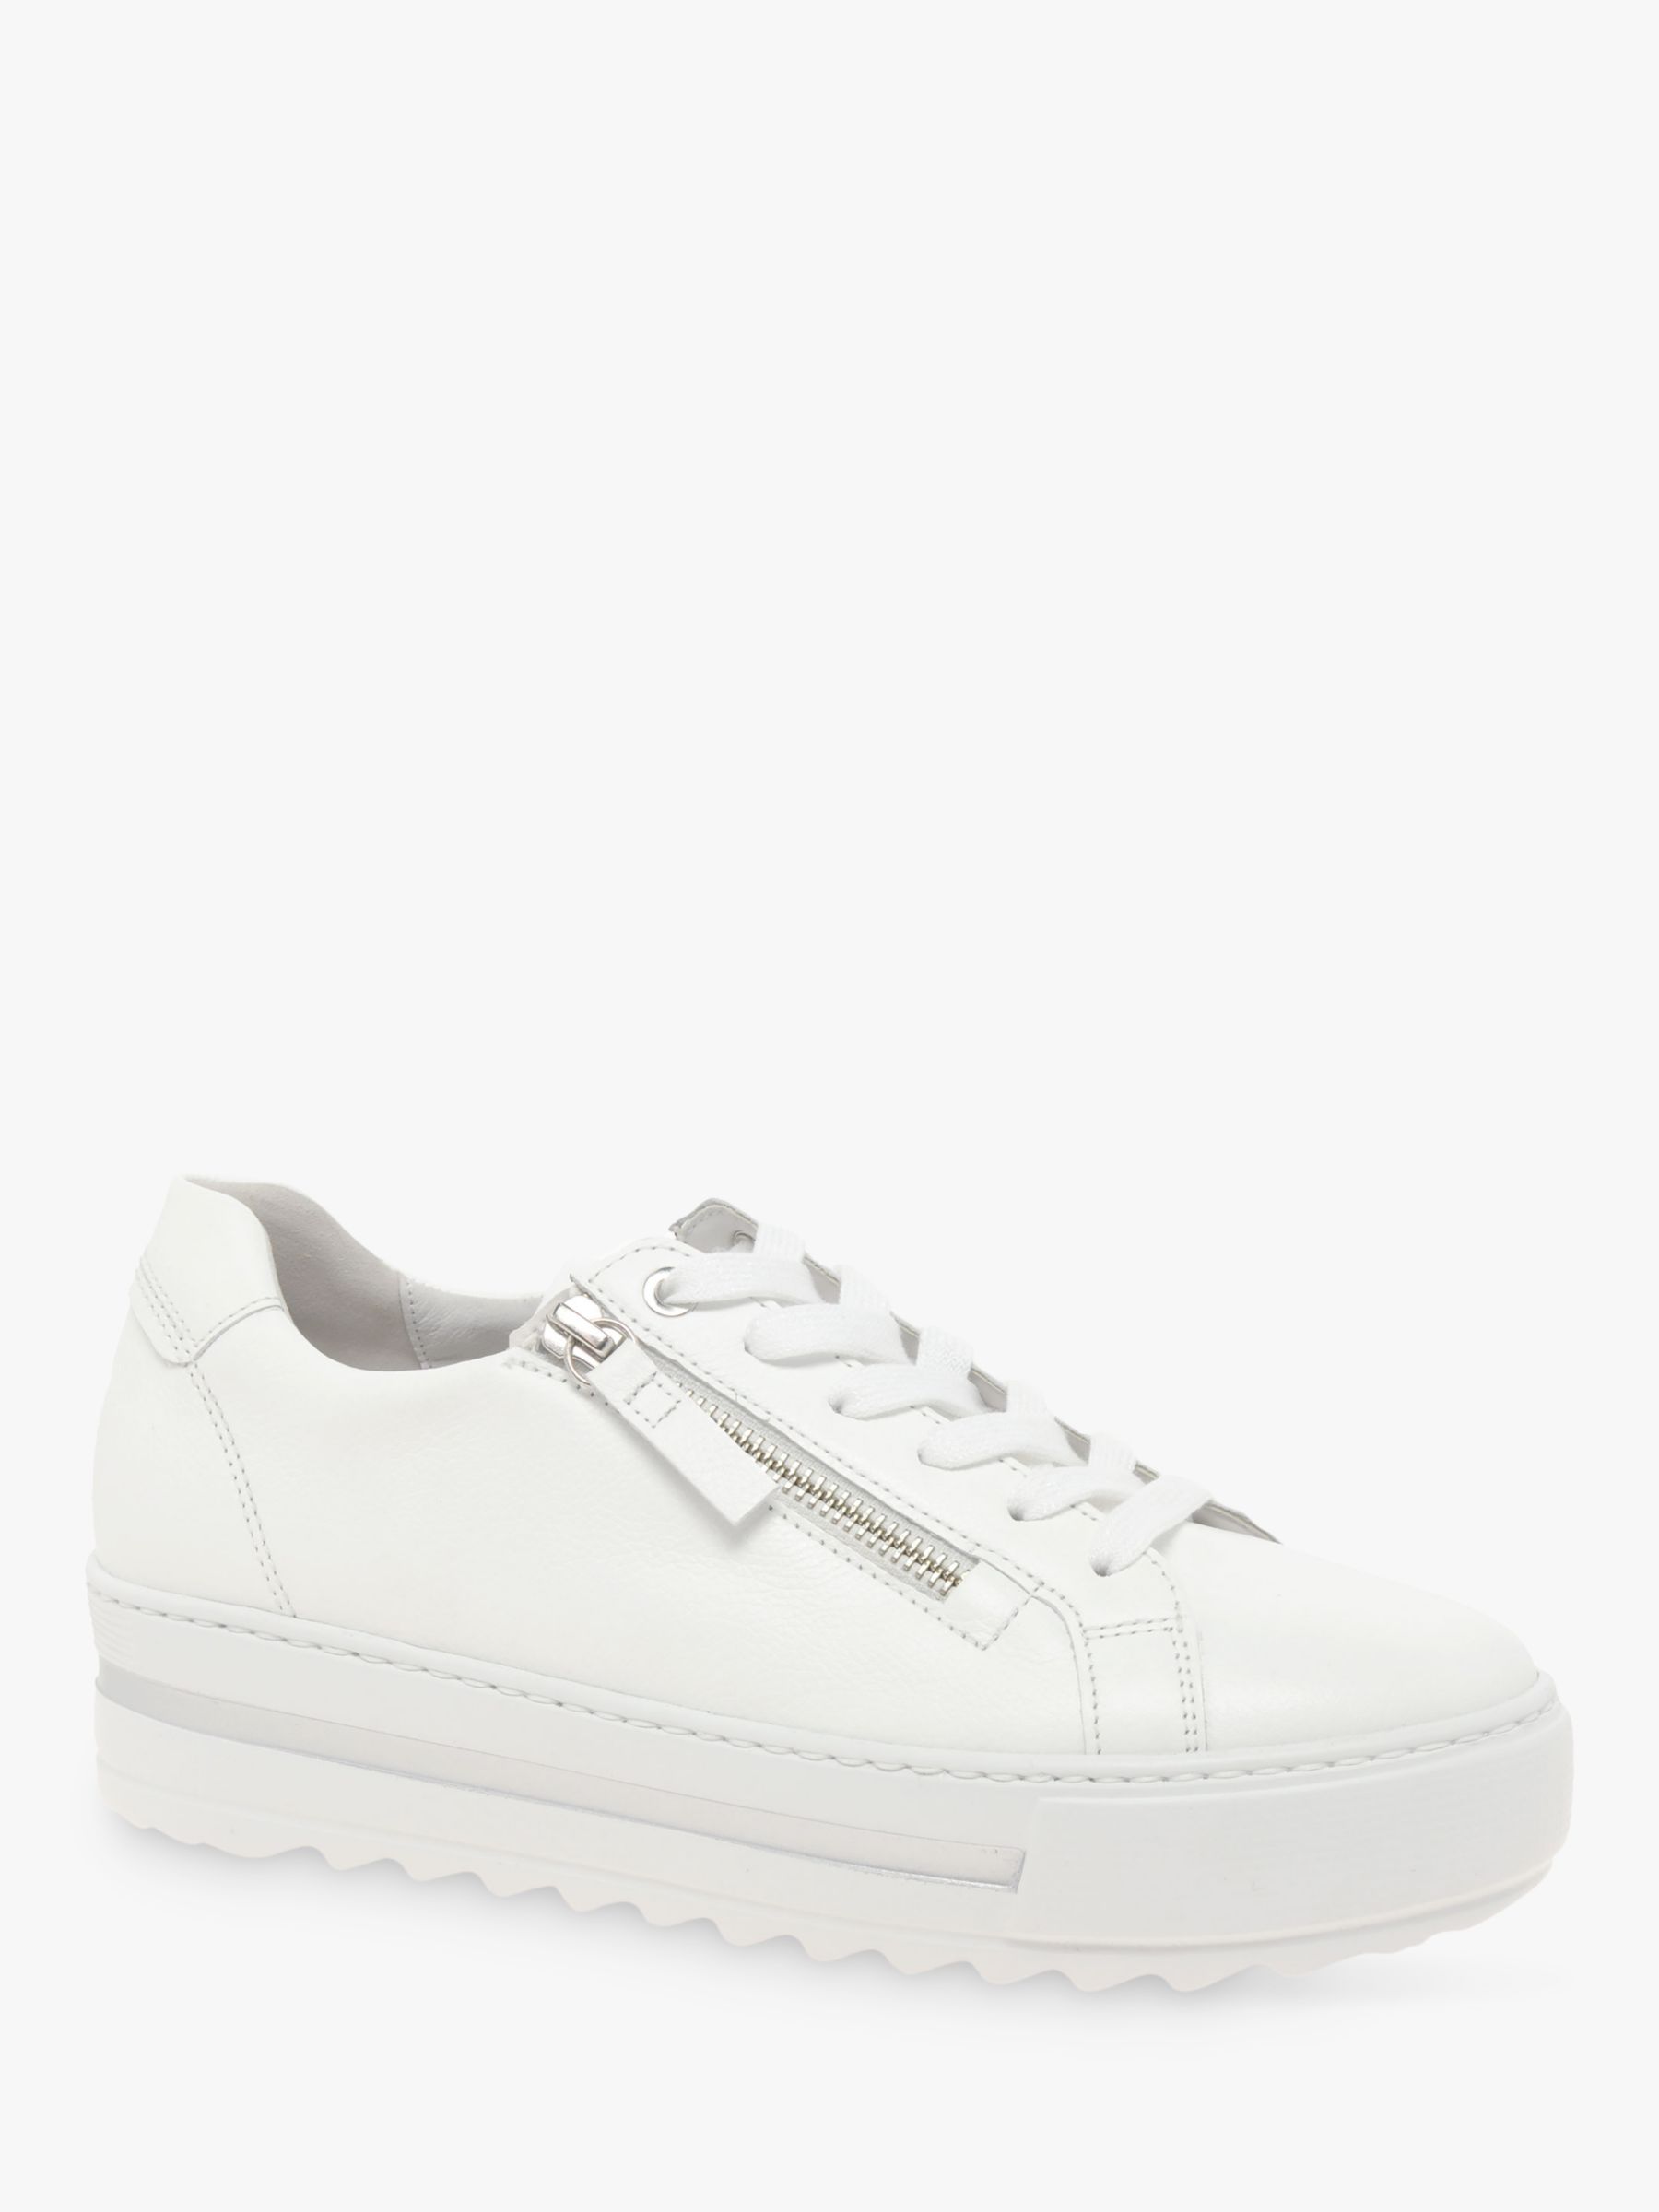 Buy Gabor Heather Wide Fit Leather Flatform Trainers, White Online at johnlewis.com